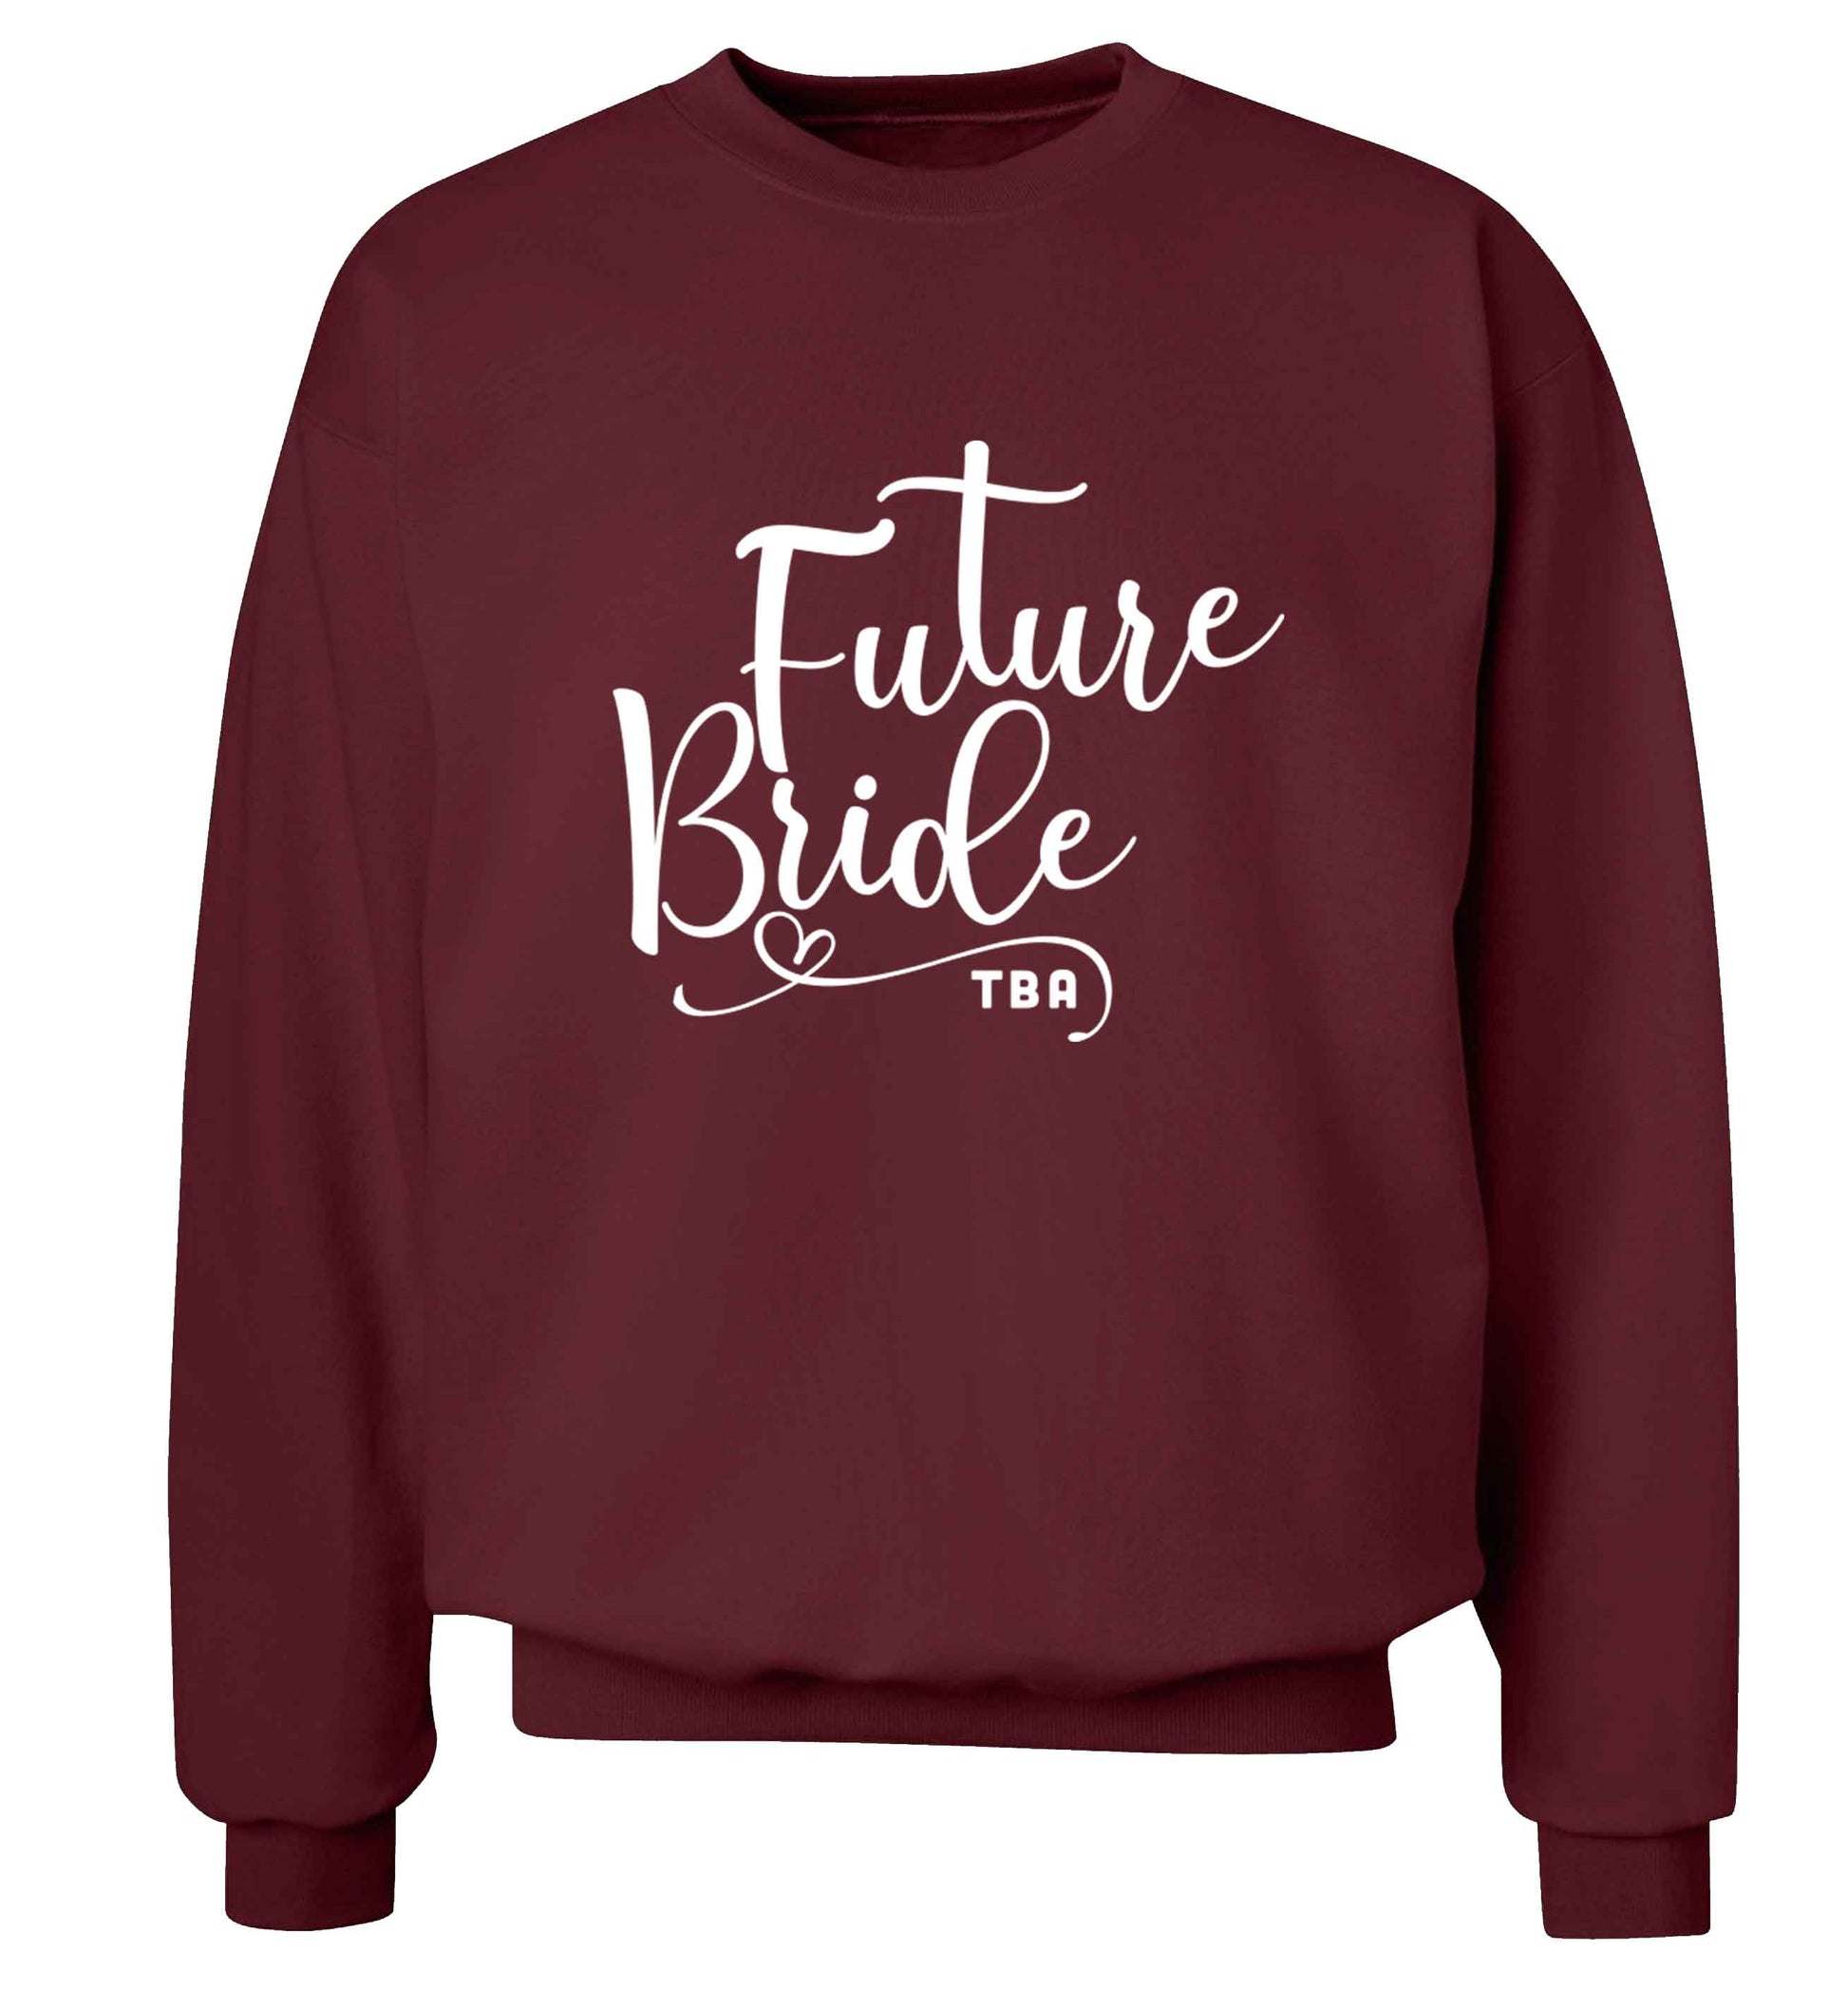 Has your wedding been postponed or delayed?Just another reason to party even HARDER!  adult's unisex maroon sweater 2XL